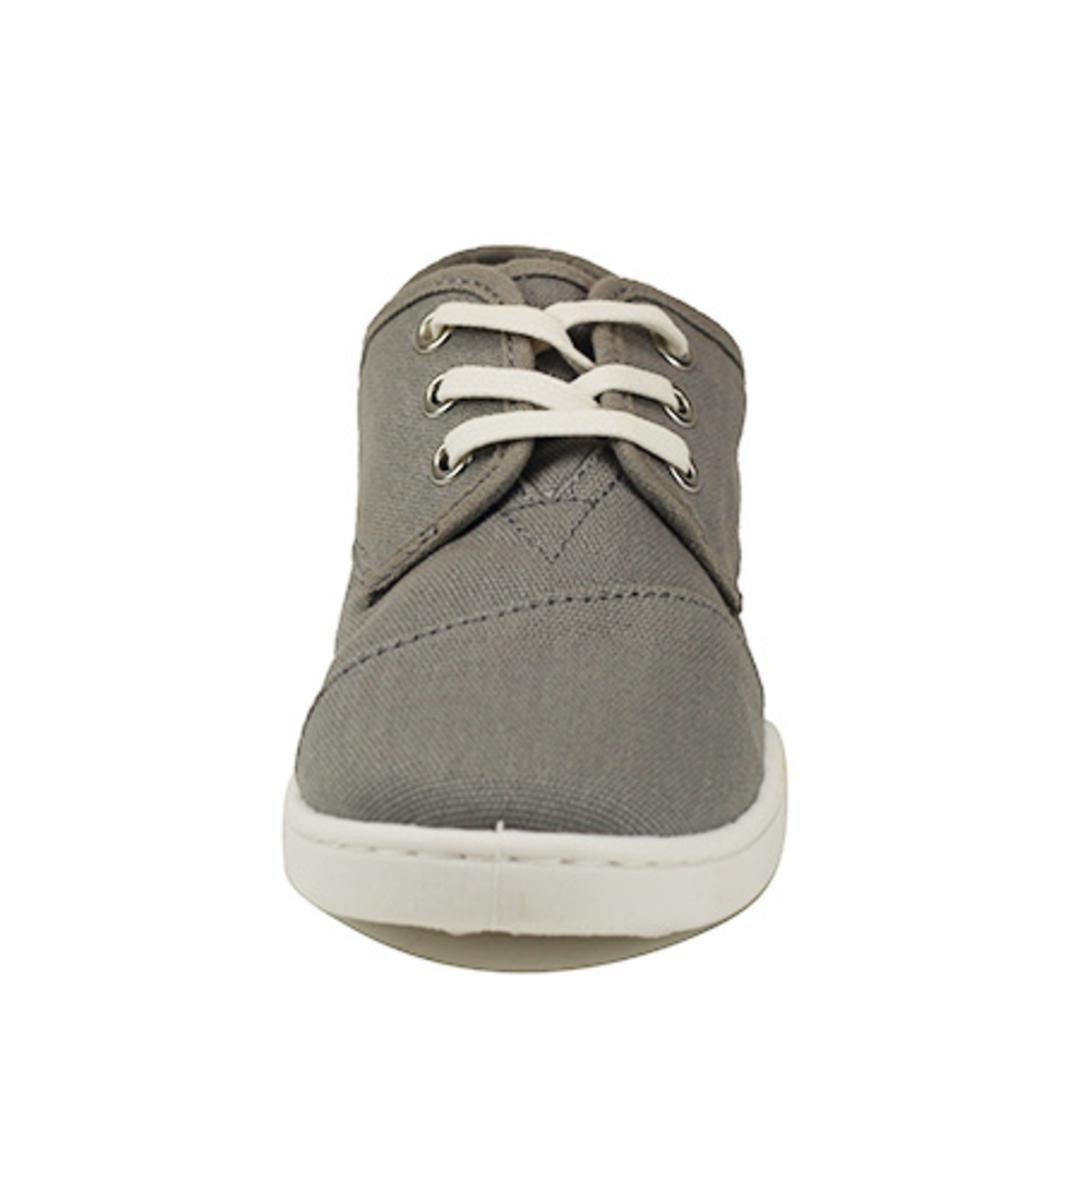 Toms for Kids: Paseo Ash Canvas